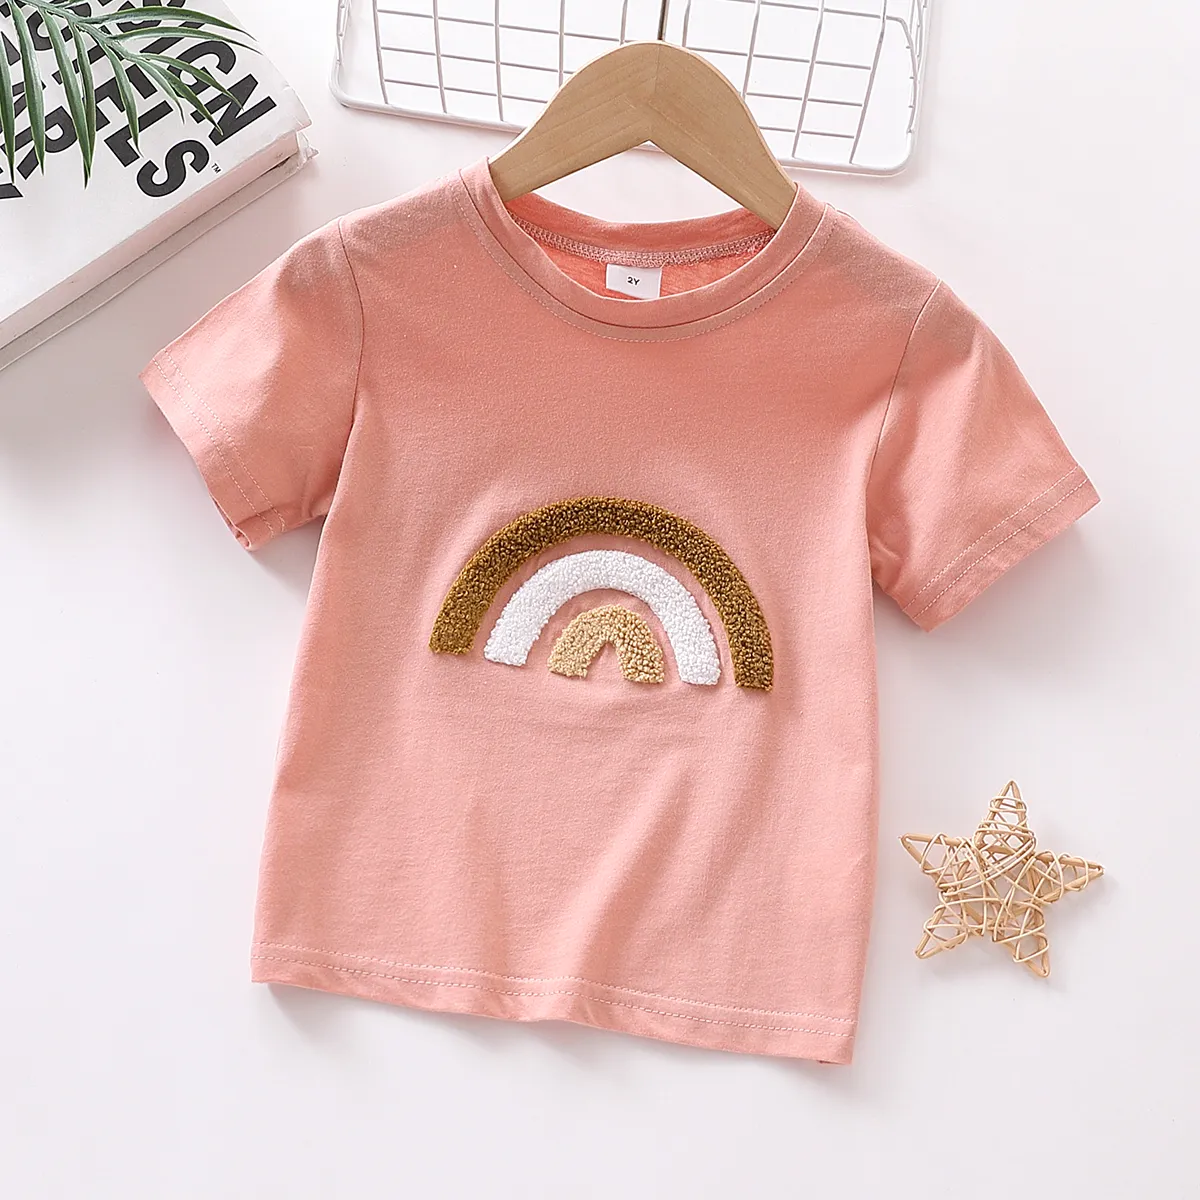 Toddler Girl 100% Cotton Rainbow Embroidered Short-sleeve Tee  big image 1